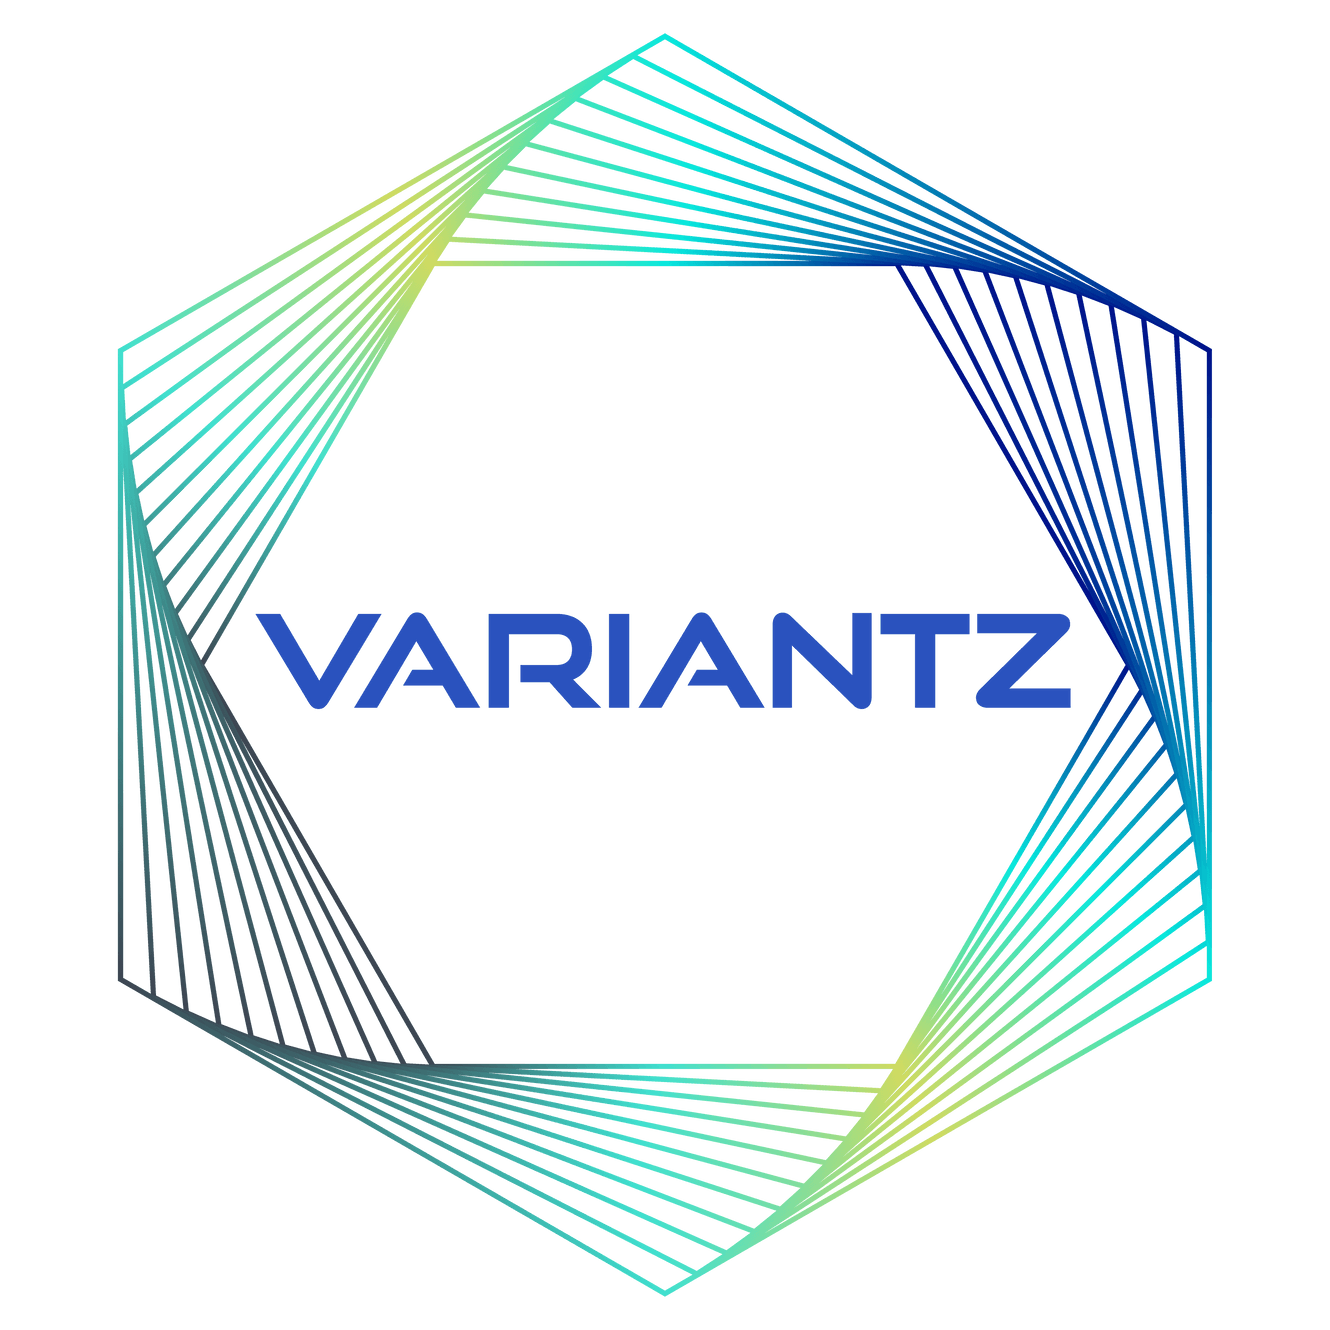 Image for Solutions | Variantz | Singapore's Leading Smart Home Systems and Smart Business Solutions Provider